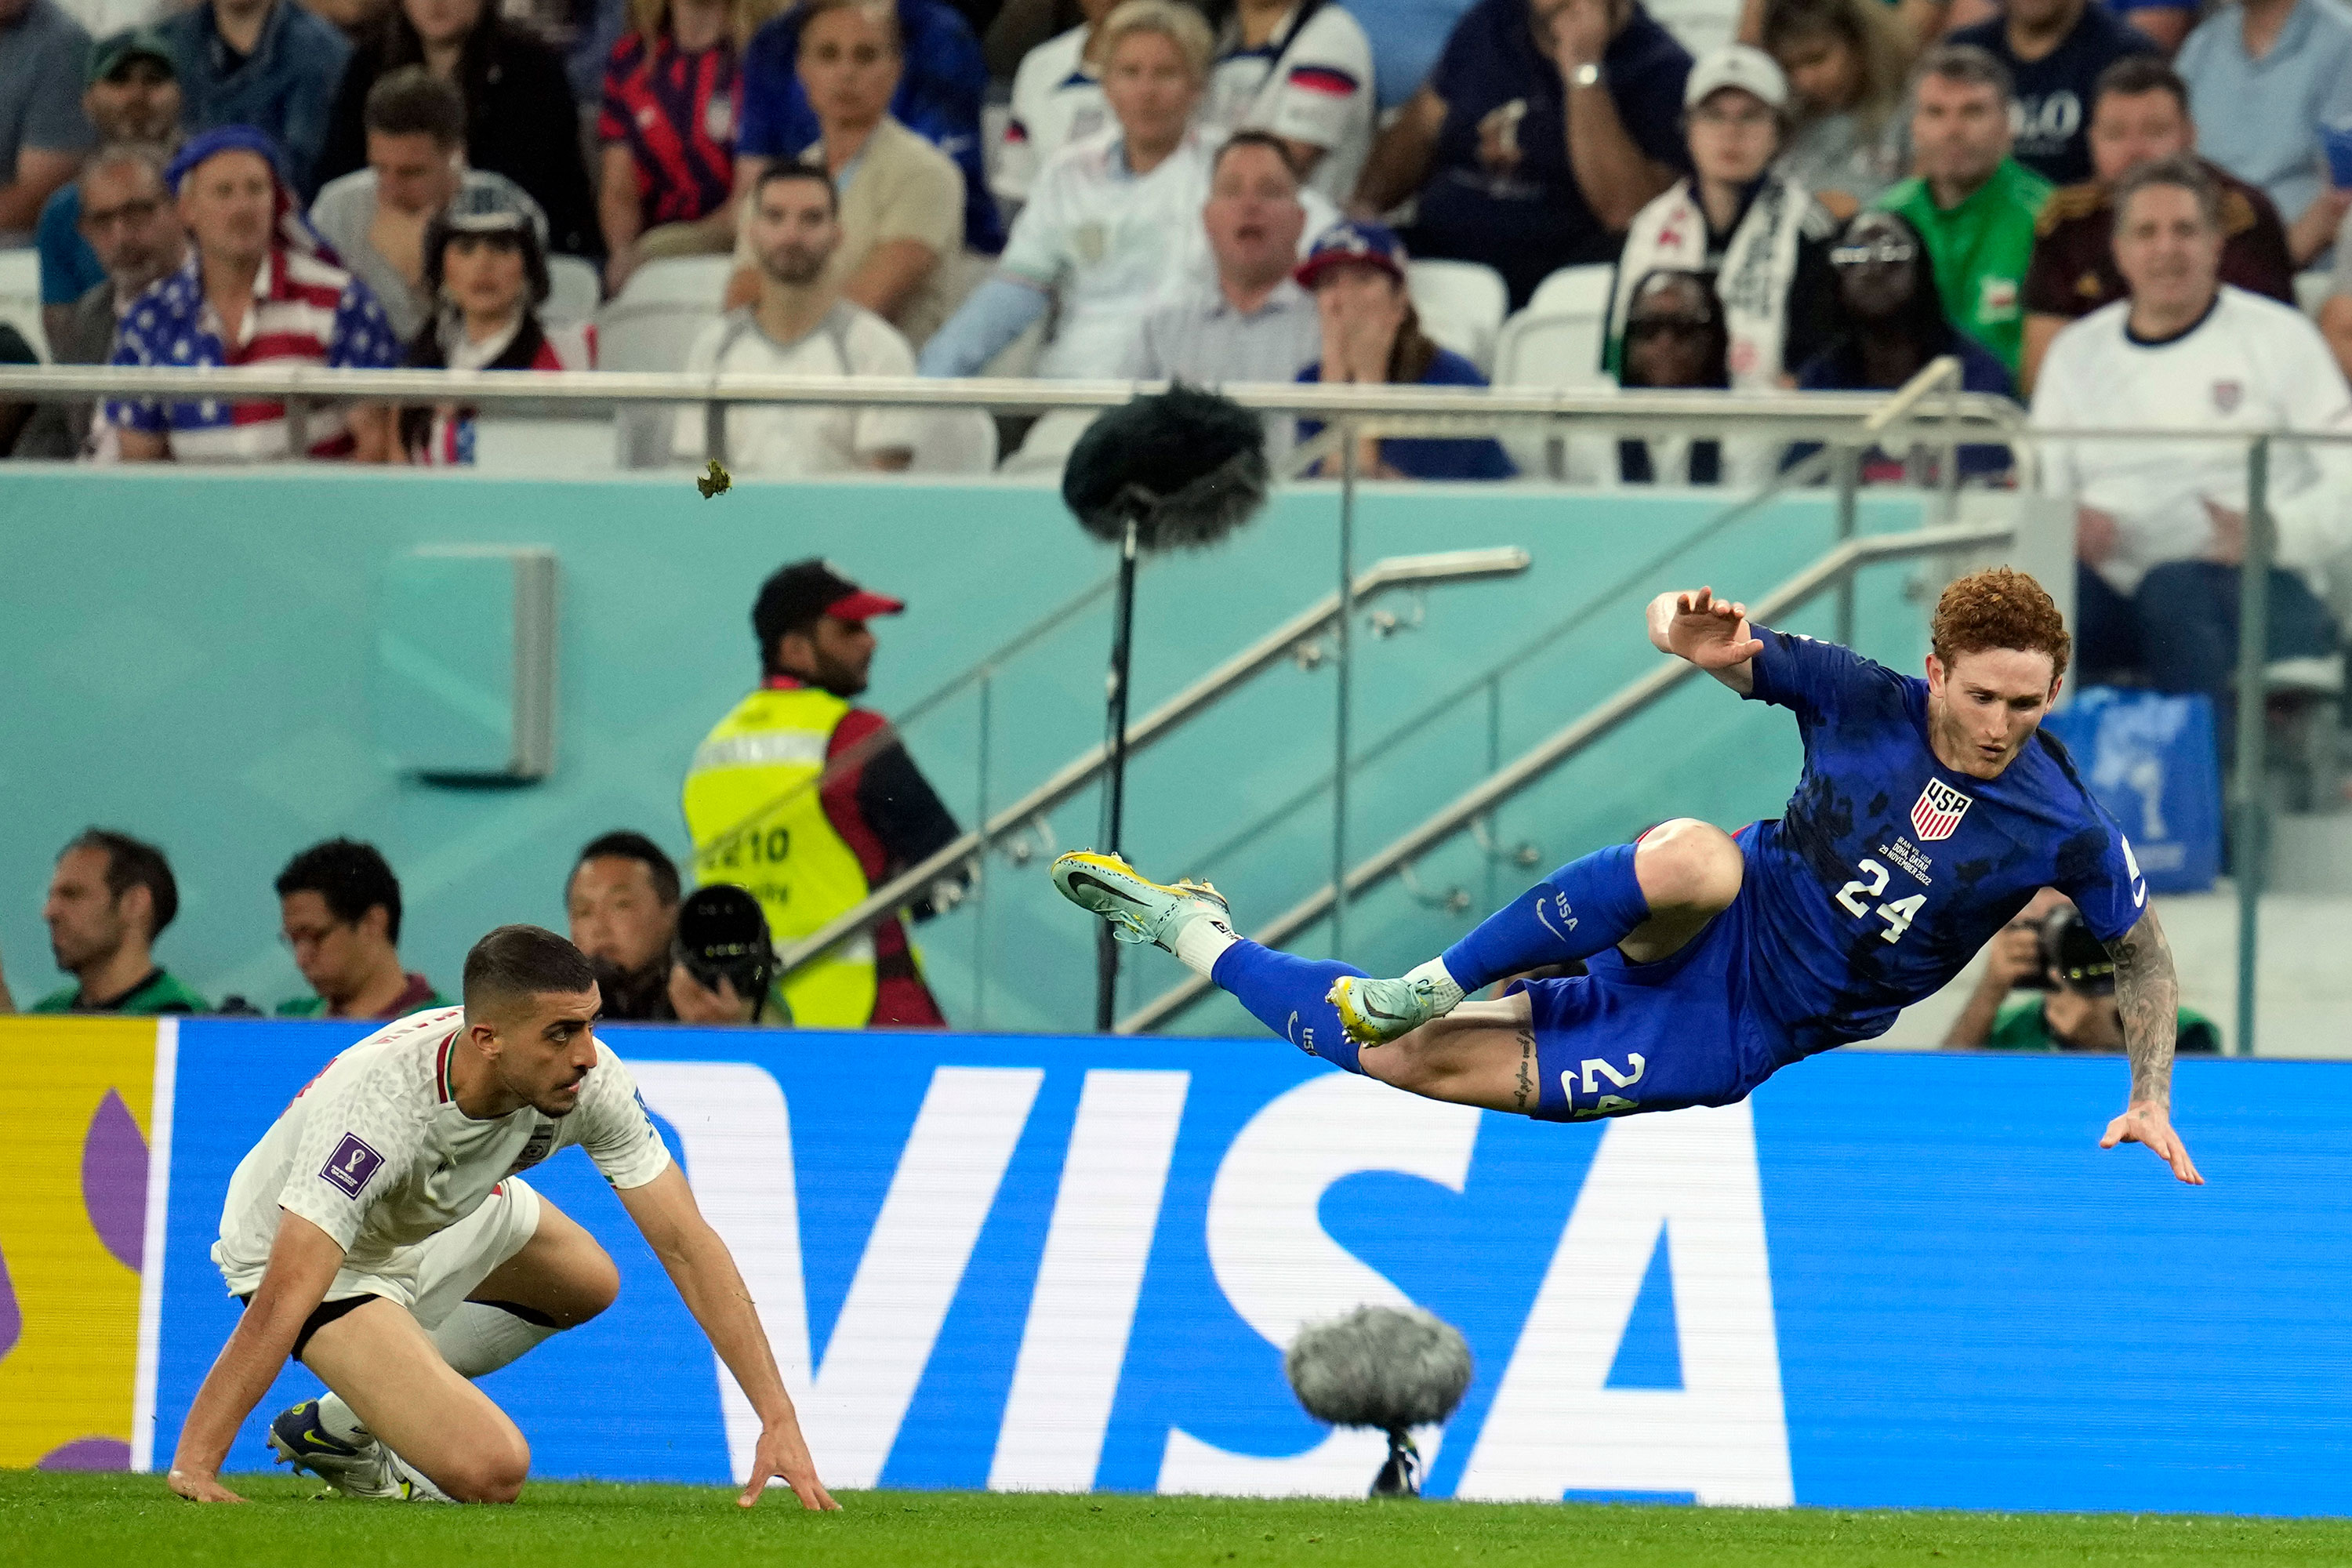 United States' Josh Sargent (24) is upended by Iran's Majid Hosseini during the World Cup group B soccer match between Iran and the United States at the Al Thumama Stadium in Doha, Qatar, Tuesday, Nov. 29, 2022. (AP Photo/Ashley Landis)